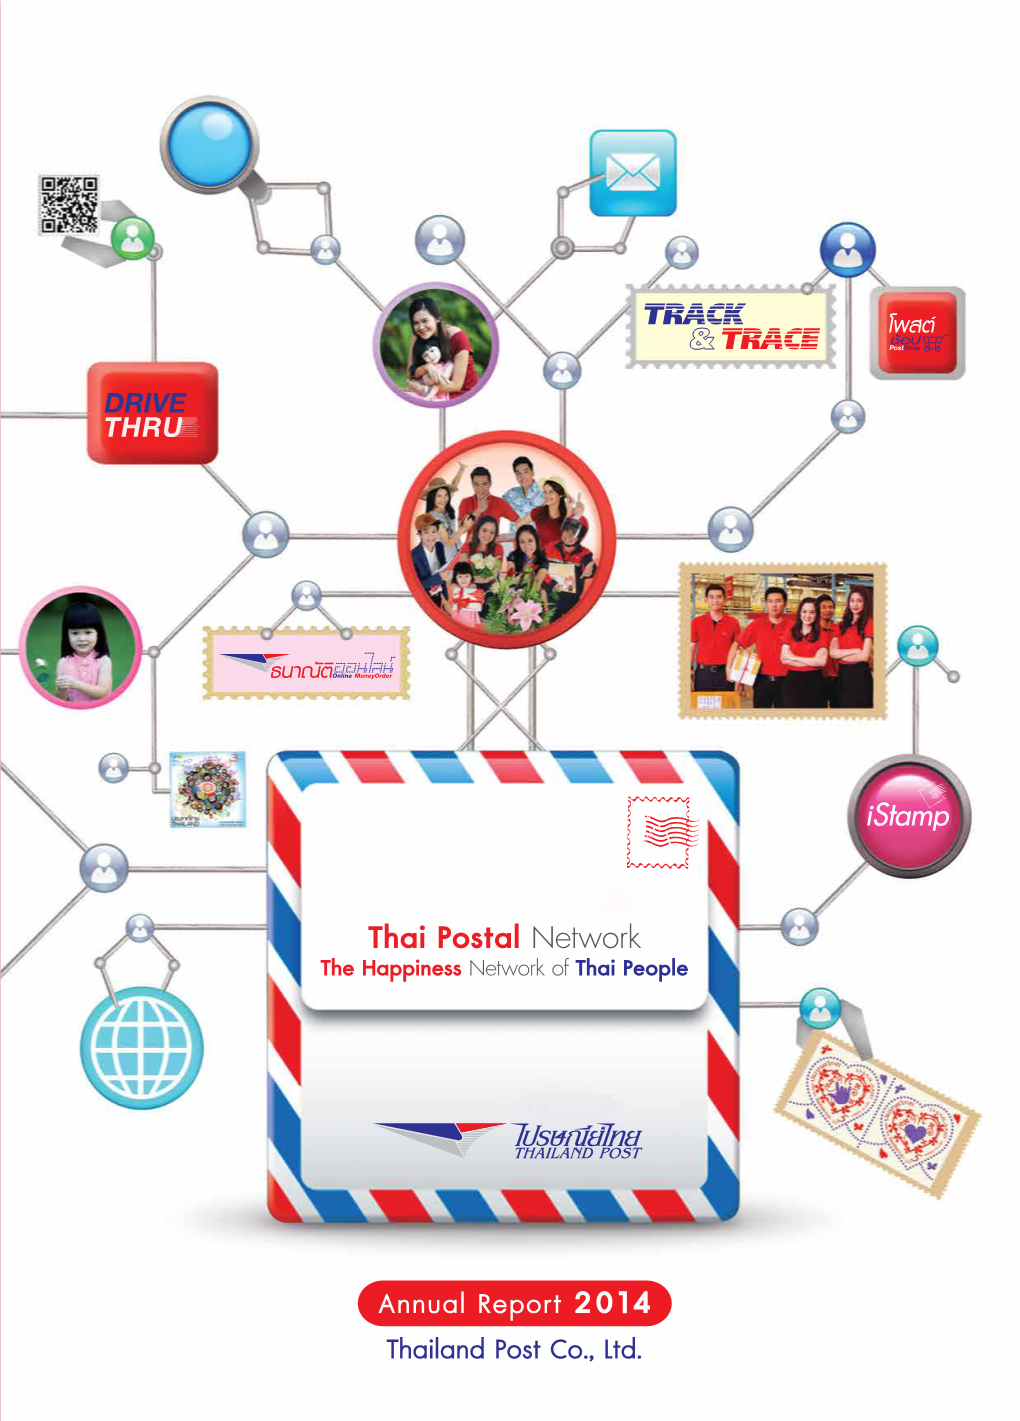 Thai Postal Network the Happiness Network of Thai People